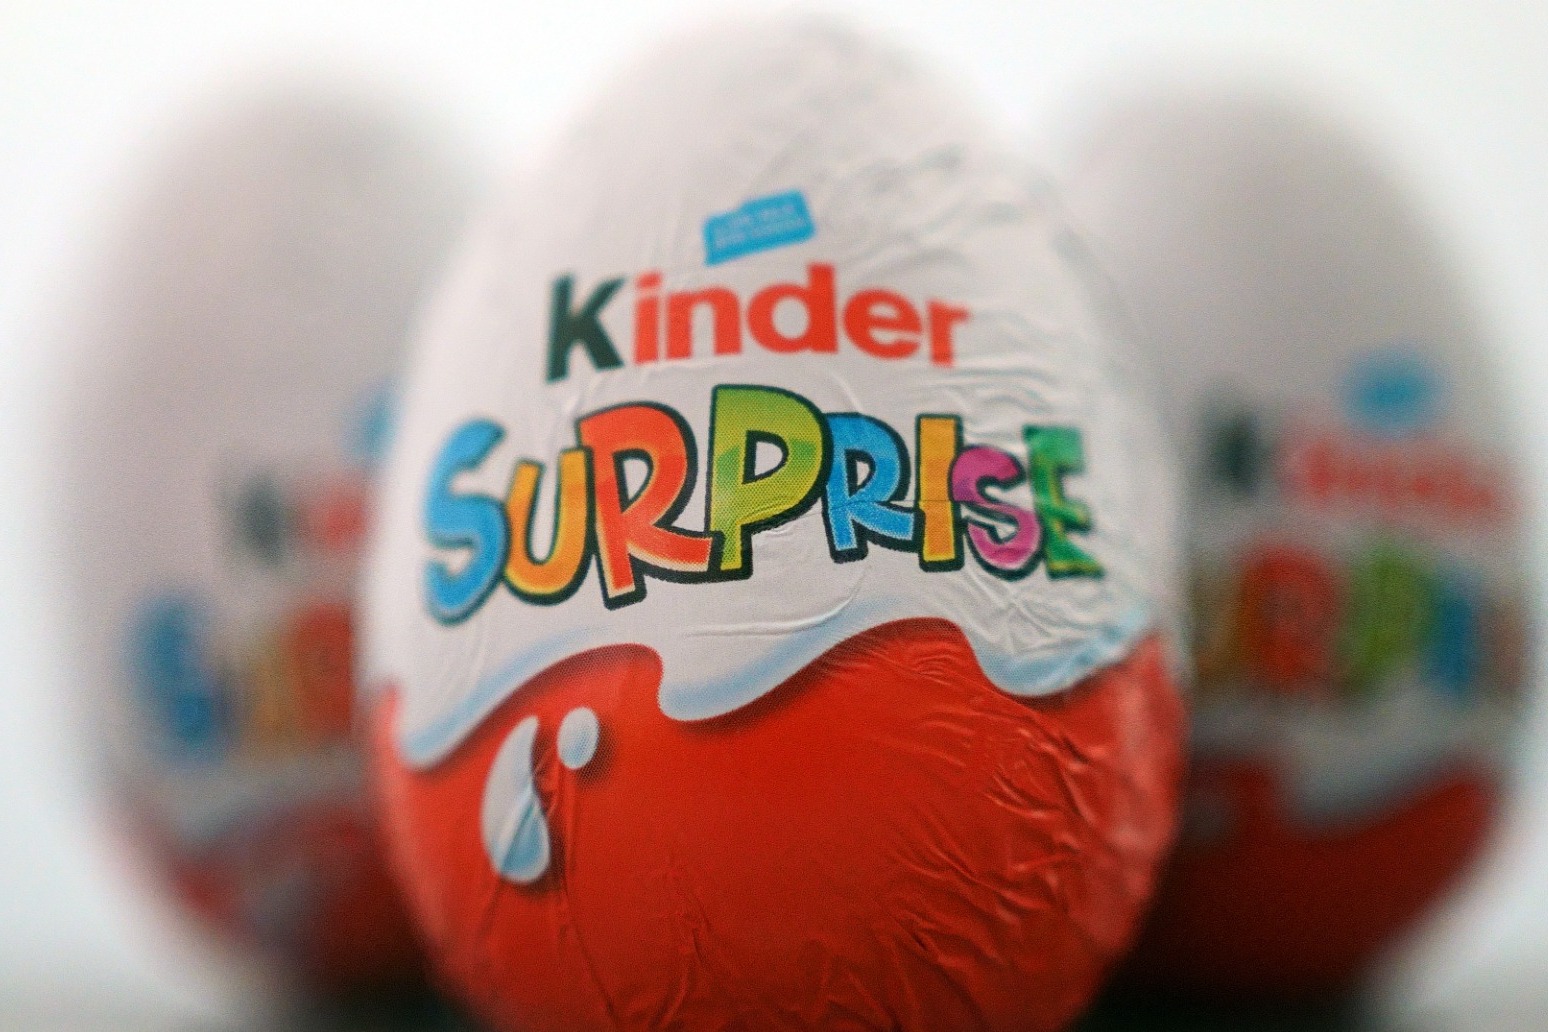 Recall of Kinder products widened amid concerns about salmonella